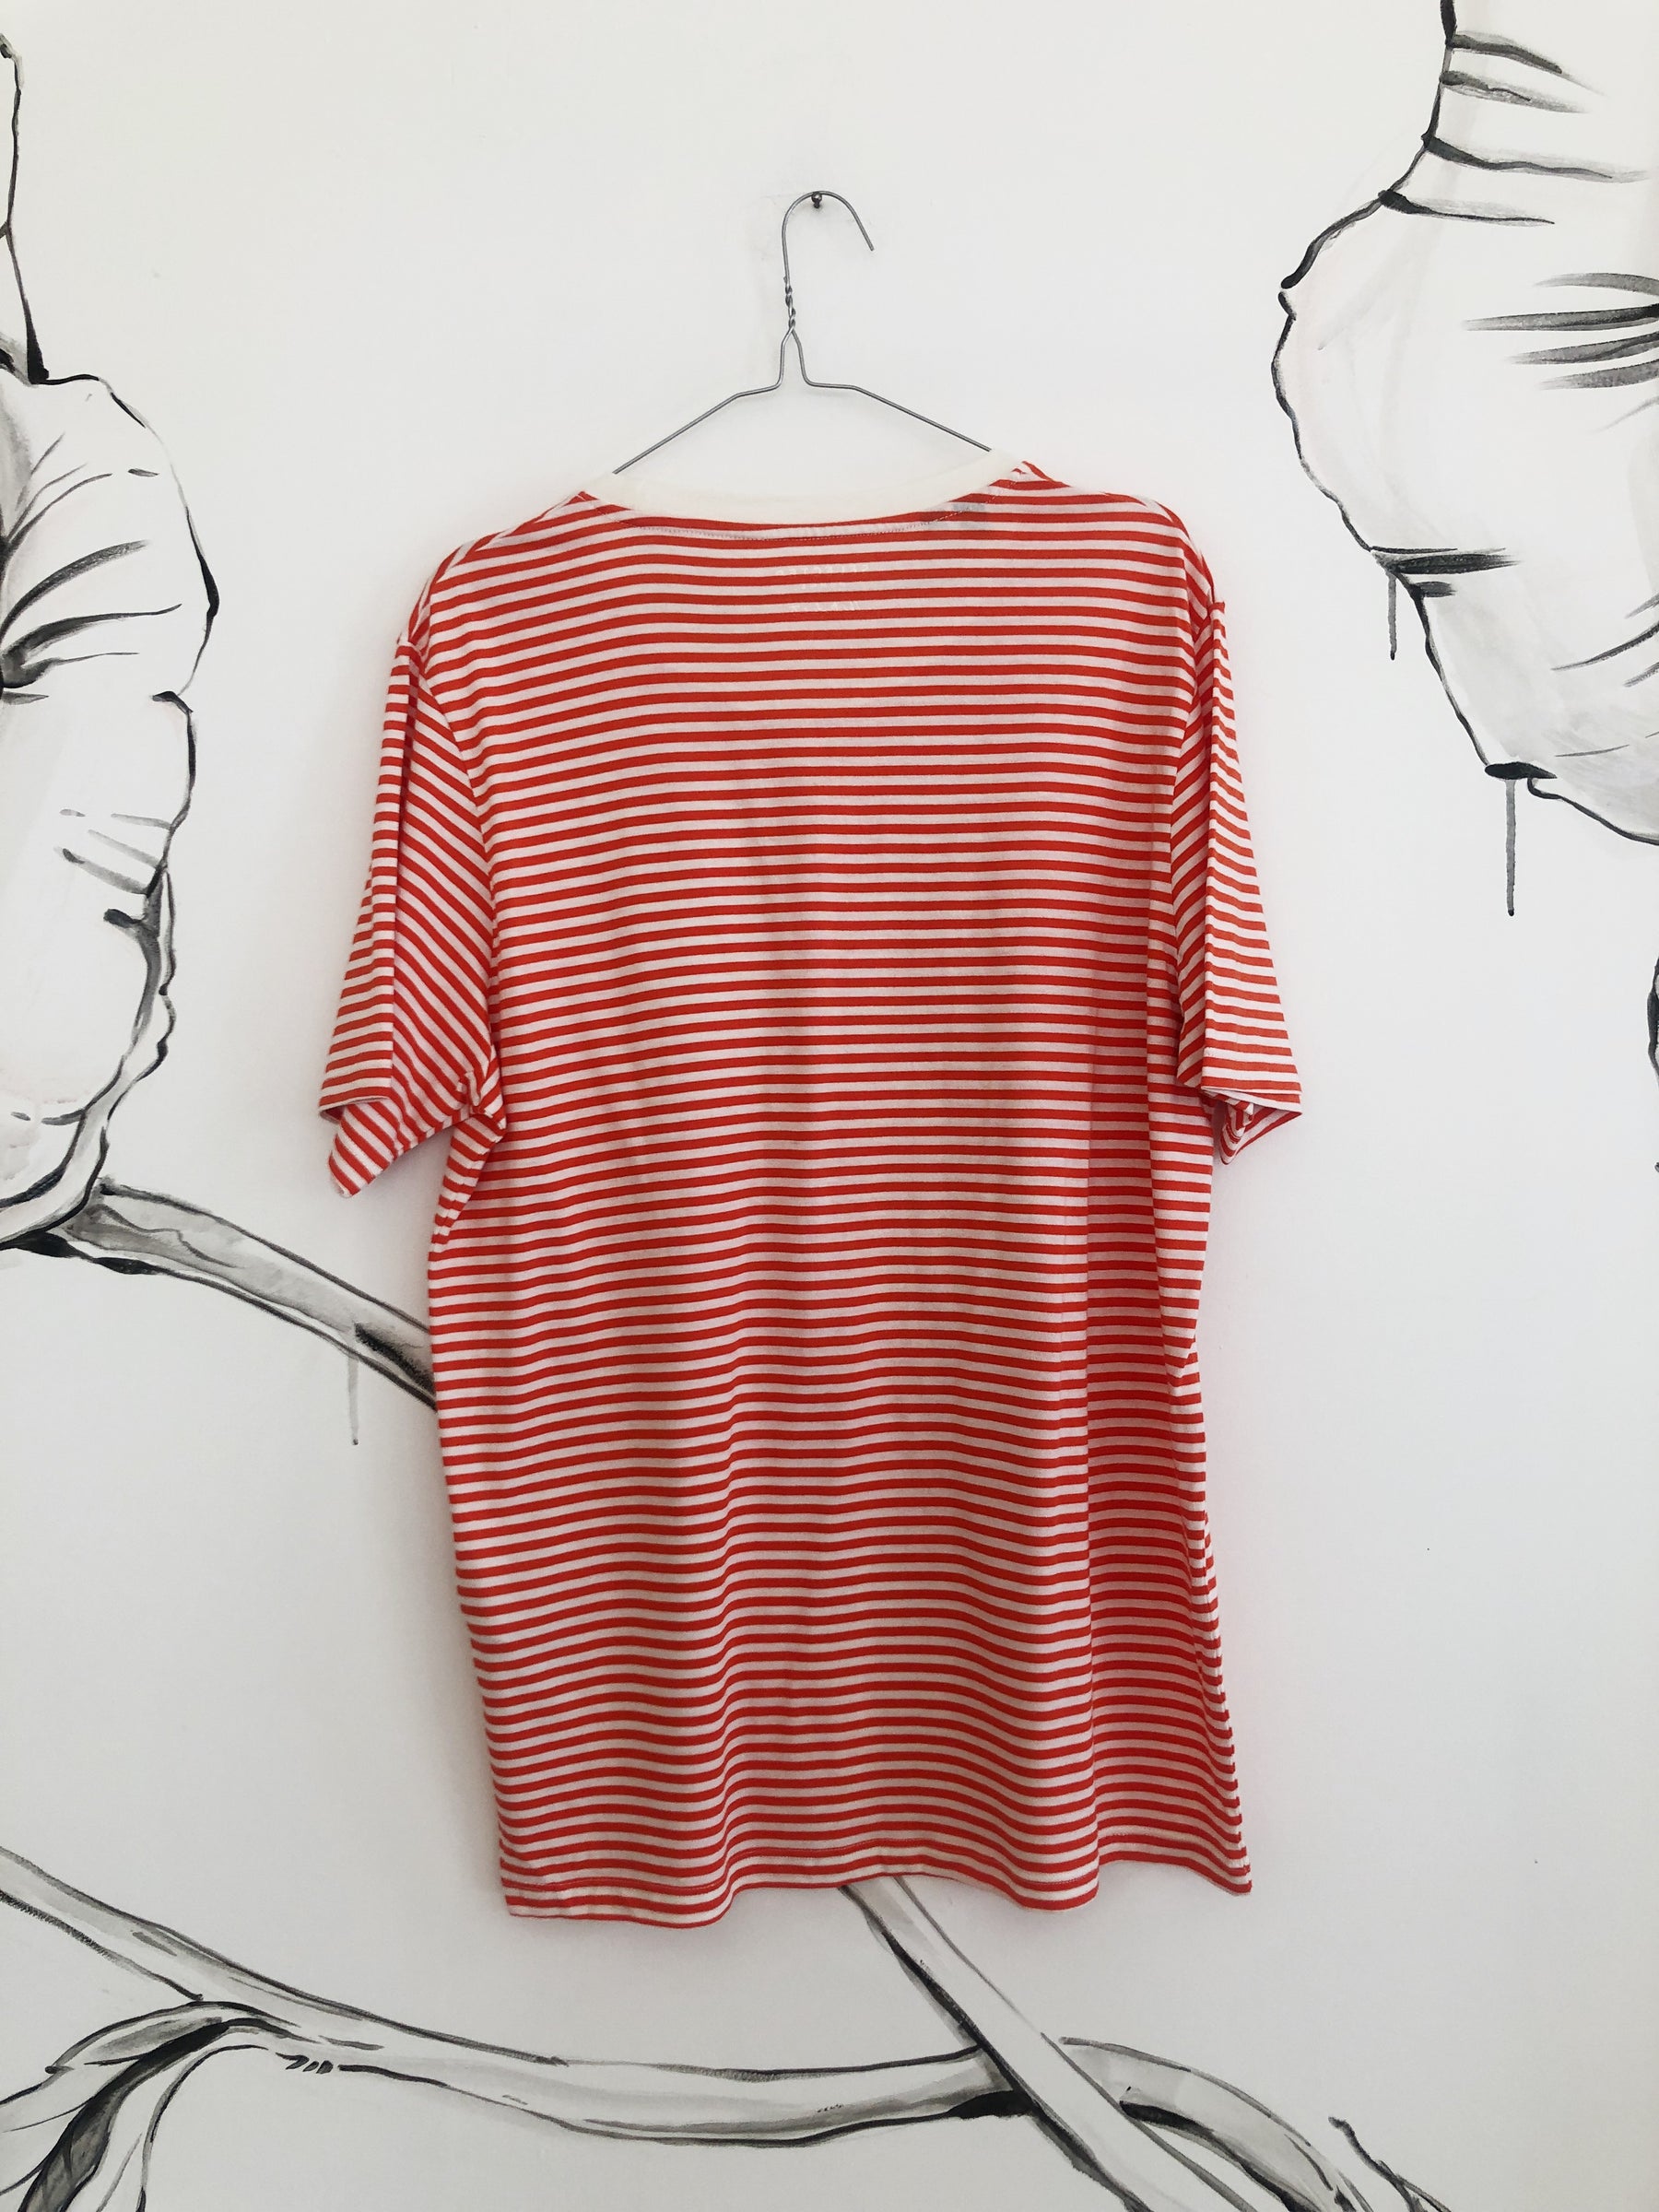 Selected Homme t-shirt